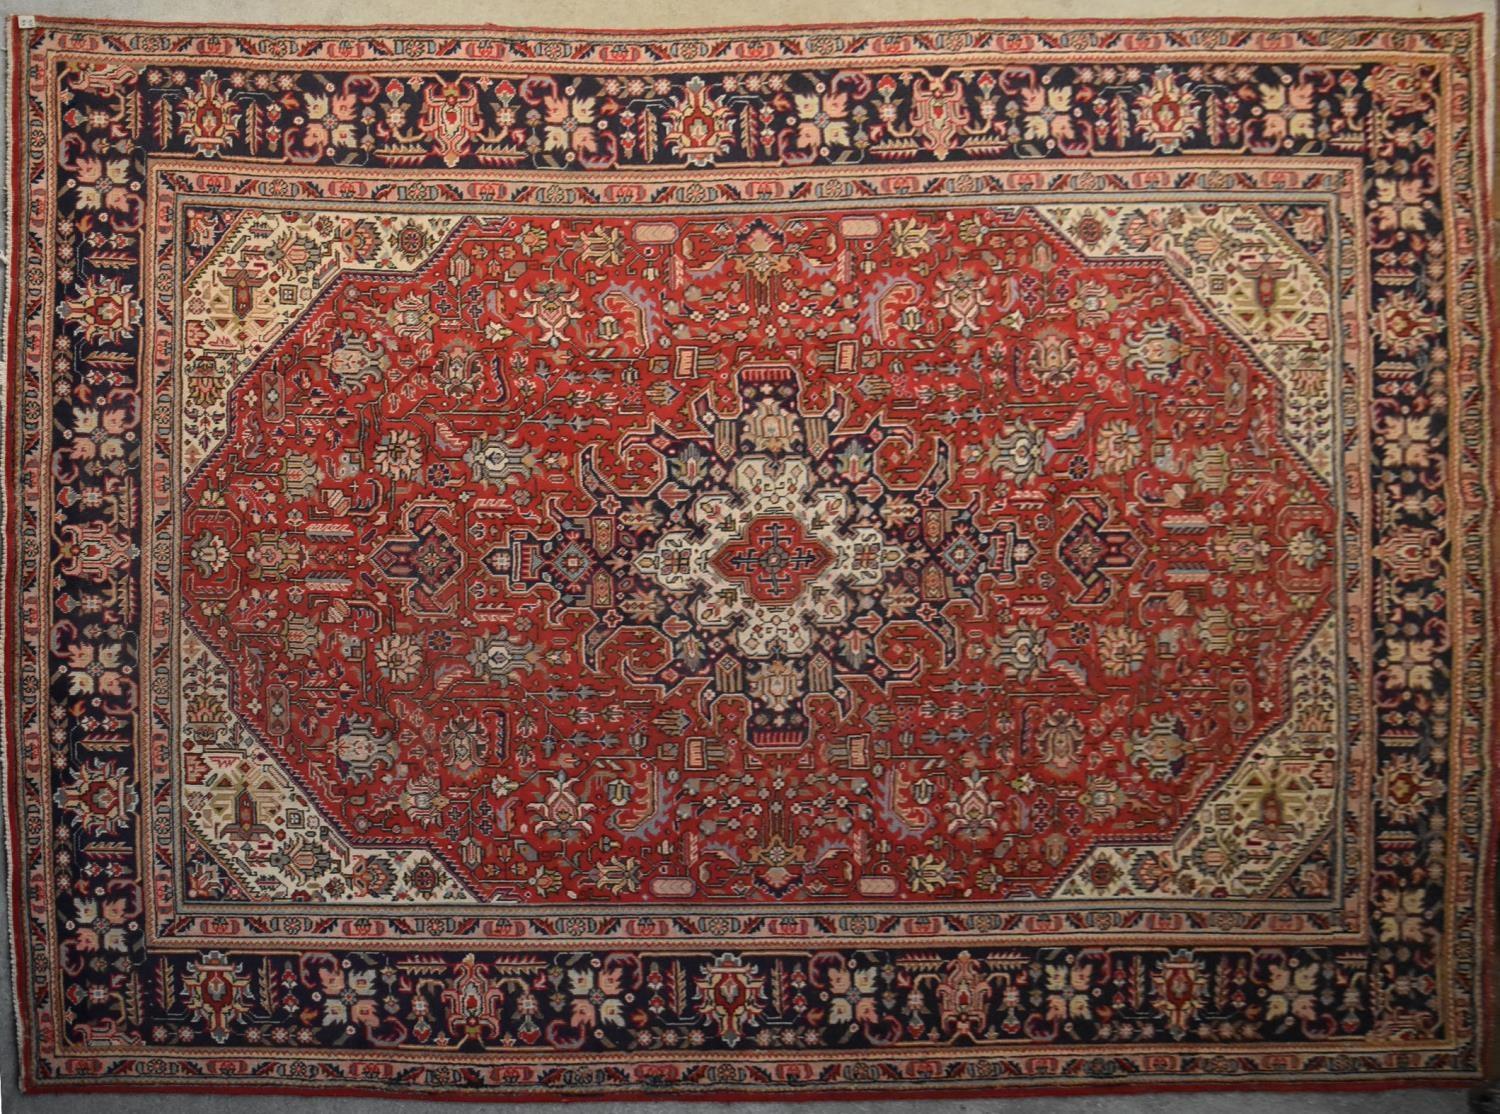 A Persian Tabriz carpet with floral central double pendant medallion surrounded by spandrels on a